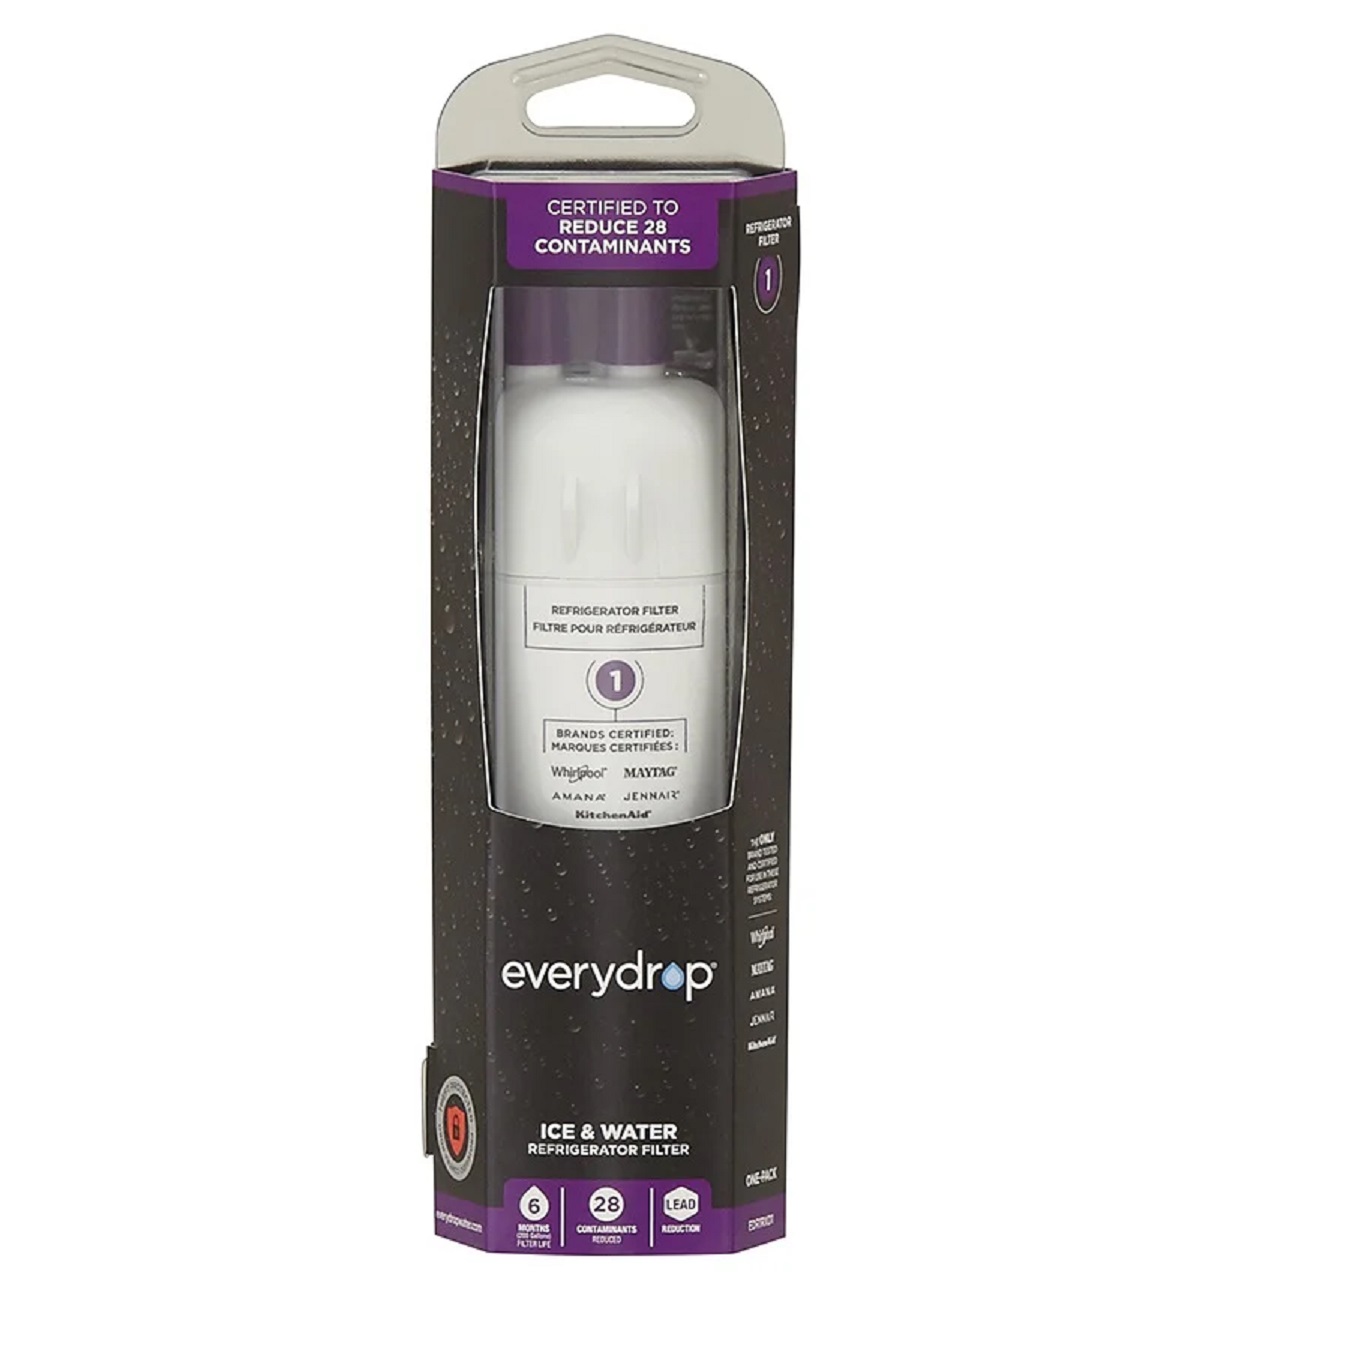 EDR1RXD1 , W10295370 , W10295370A EveryDrop by Whirlpool Refrigerator Water Filter 1 (Pack of 1) - image 1 of 3